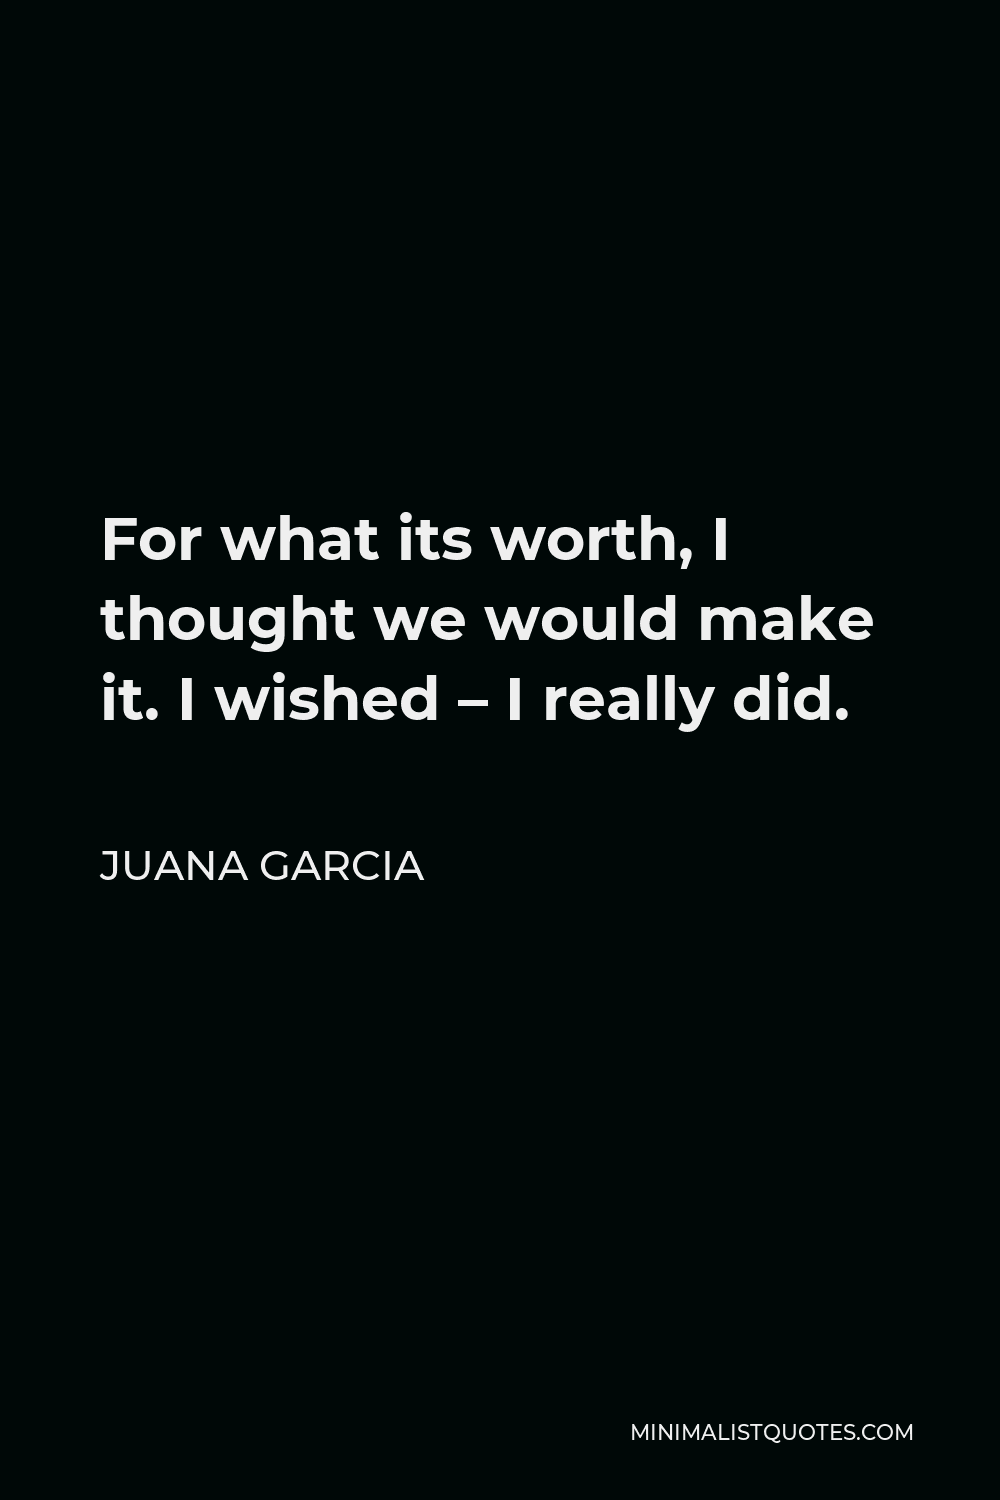 Juana Garcia Quote - For what its worth, I thought we would make it. I wished – I really did.